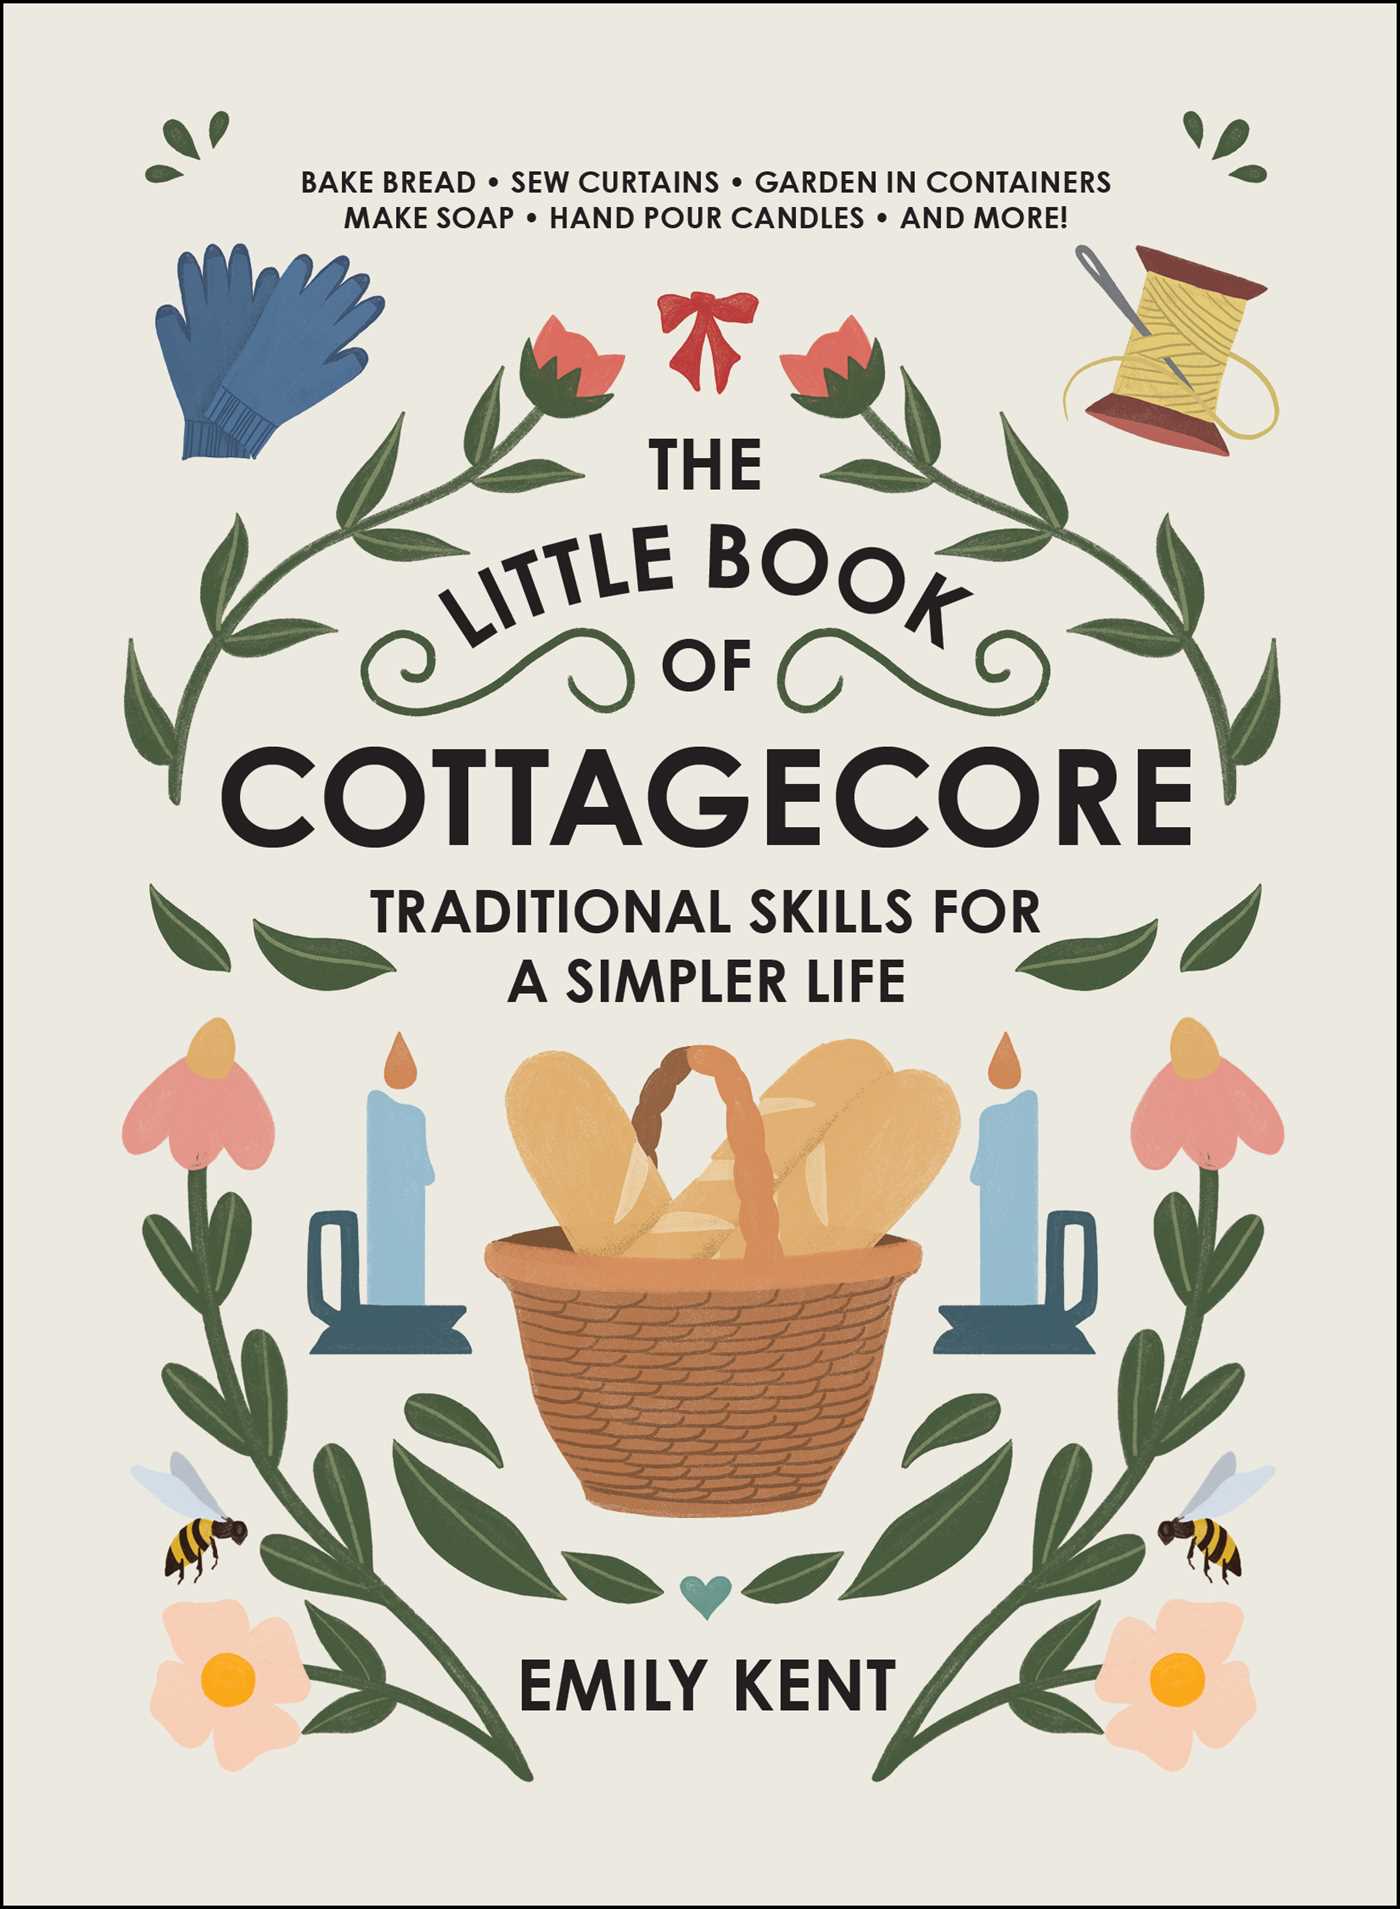 Image for "The Little Book of Cottagecore"